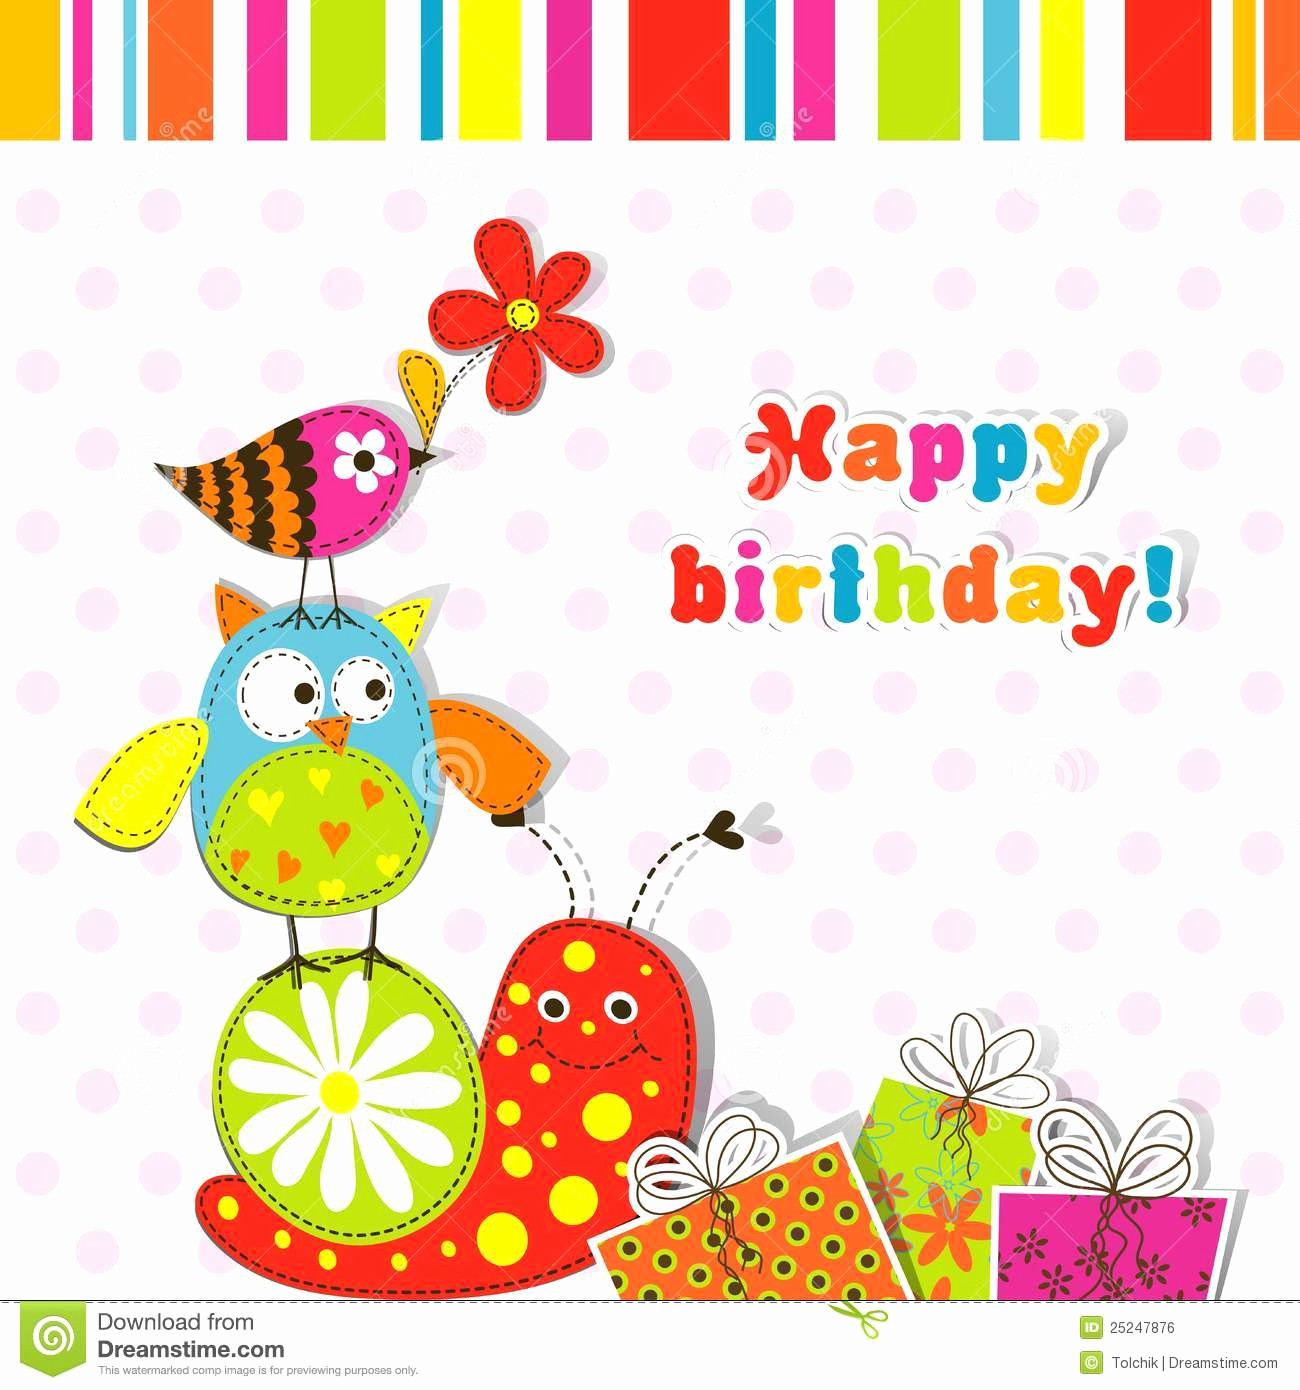 Templates for Cards Free Downloads Unique Birthday Card Template